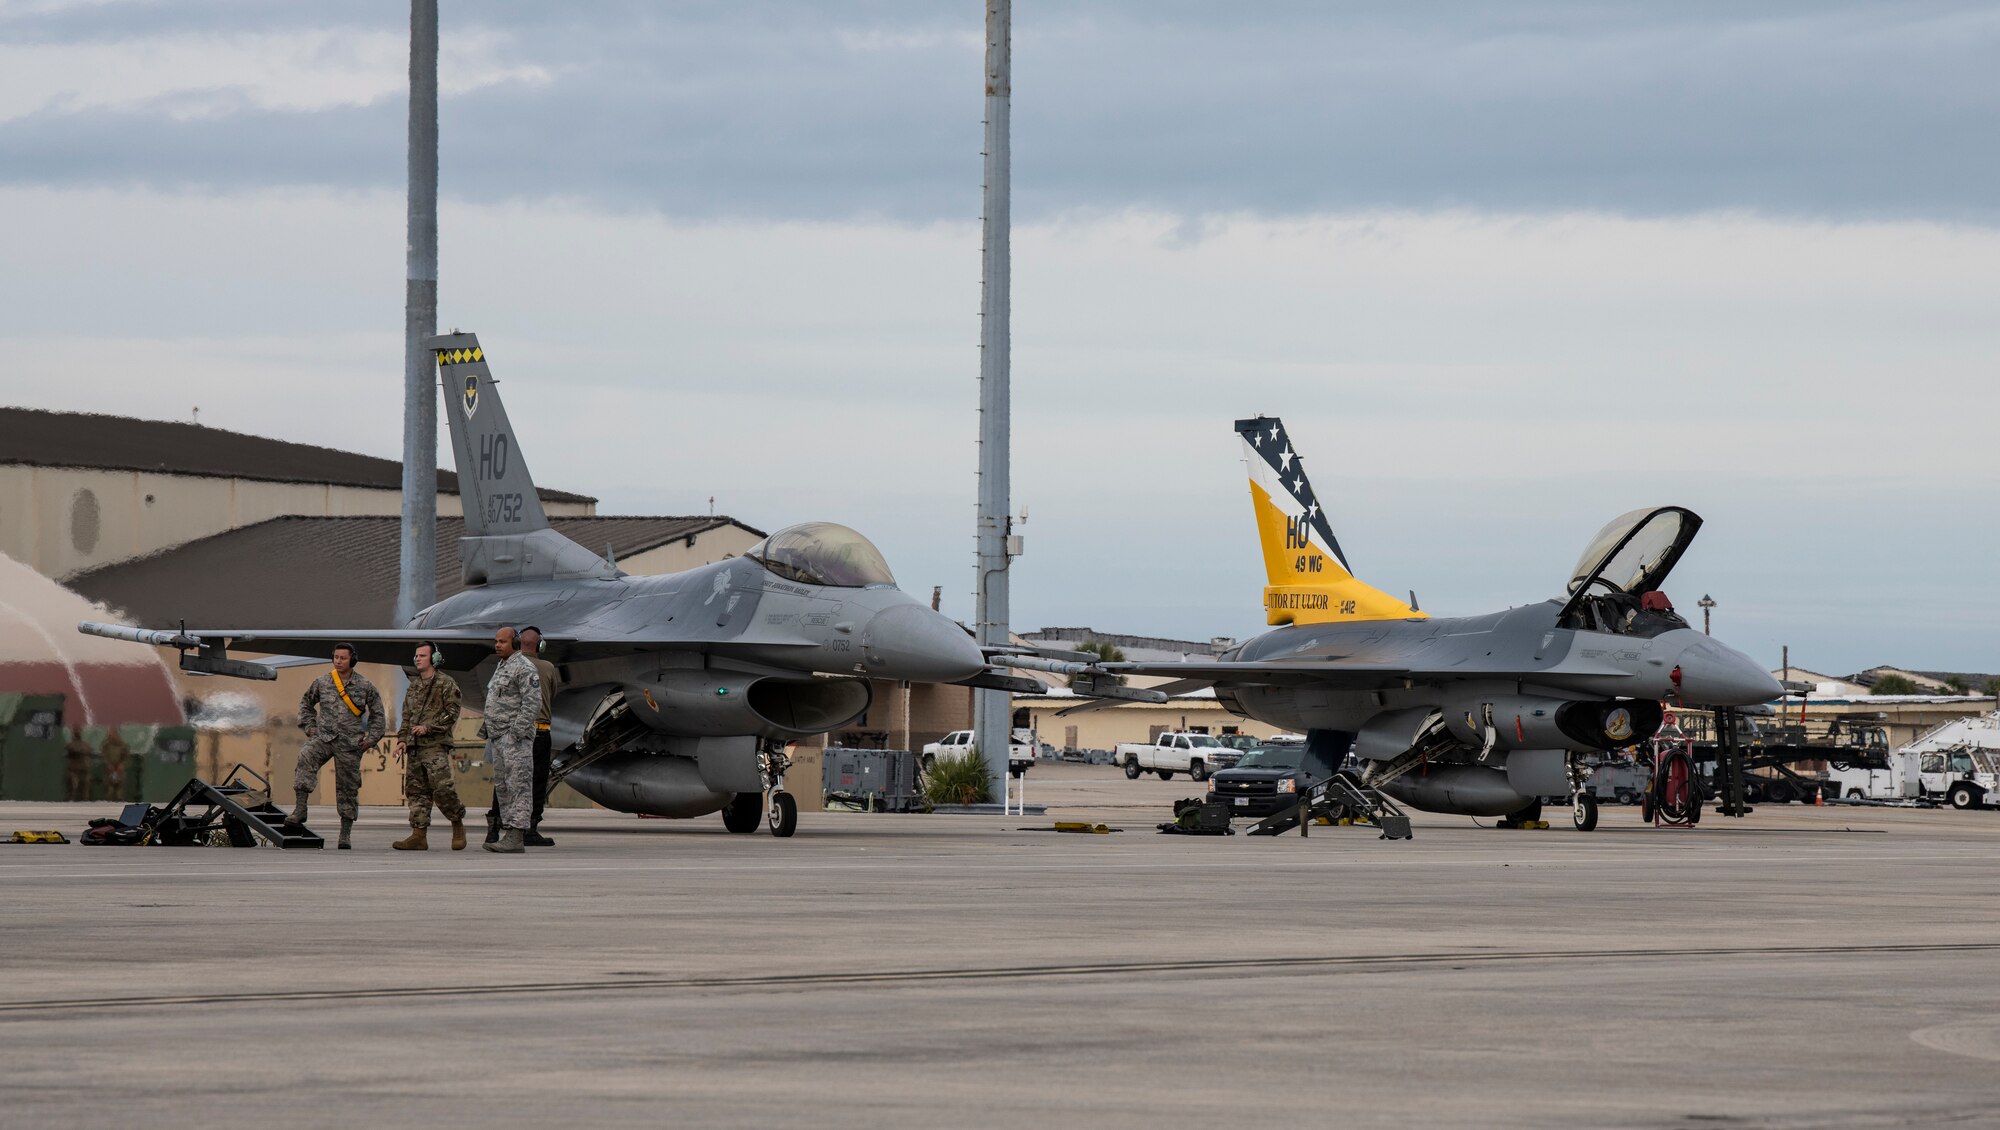 Two U.S. Air Force F-16 Fighting Falcons from Holloman Air Force Base, N.M., stand-by after a training flight at Tyndall Air Force Base, Fla., Feb. 4, 2020. The 325th Fighter Wing and 53rd Weapons Evaluation Group regularly host units from around the country for combat readiness evaluations. (U.S. Air Force photo by Senior Airman Stefan Alvarez